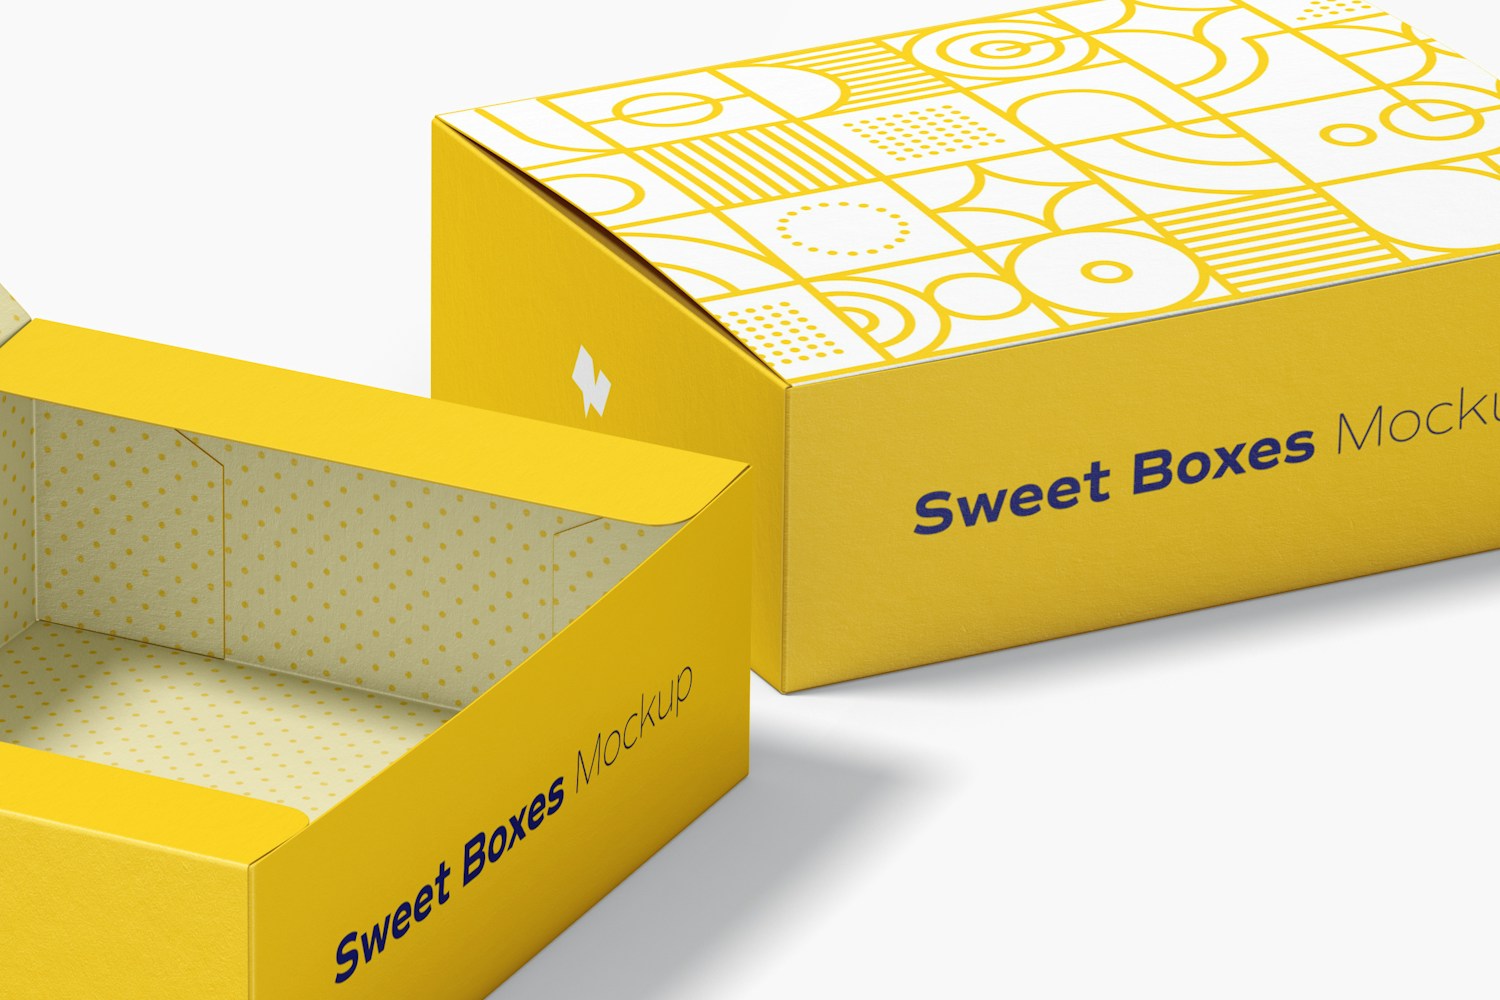 Sweet Boxes Mockup, Opened and Closed